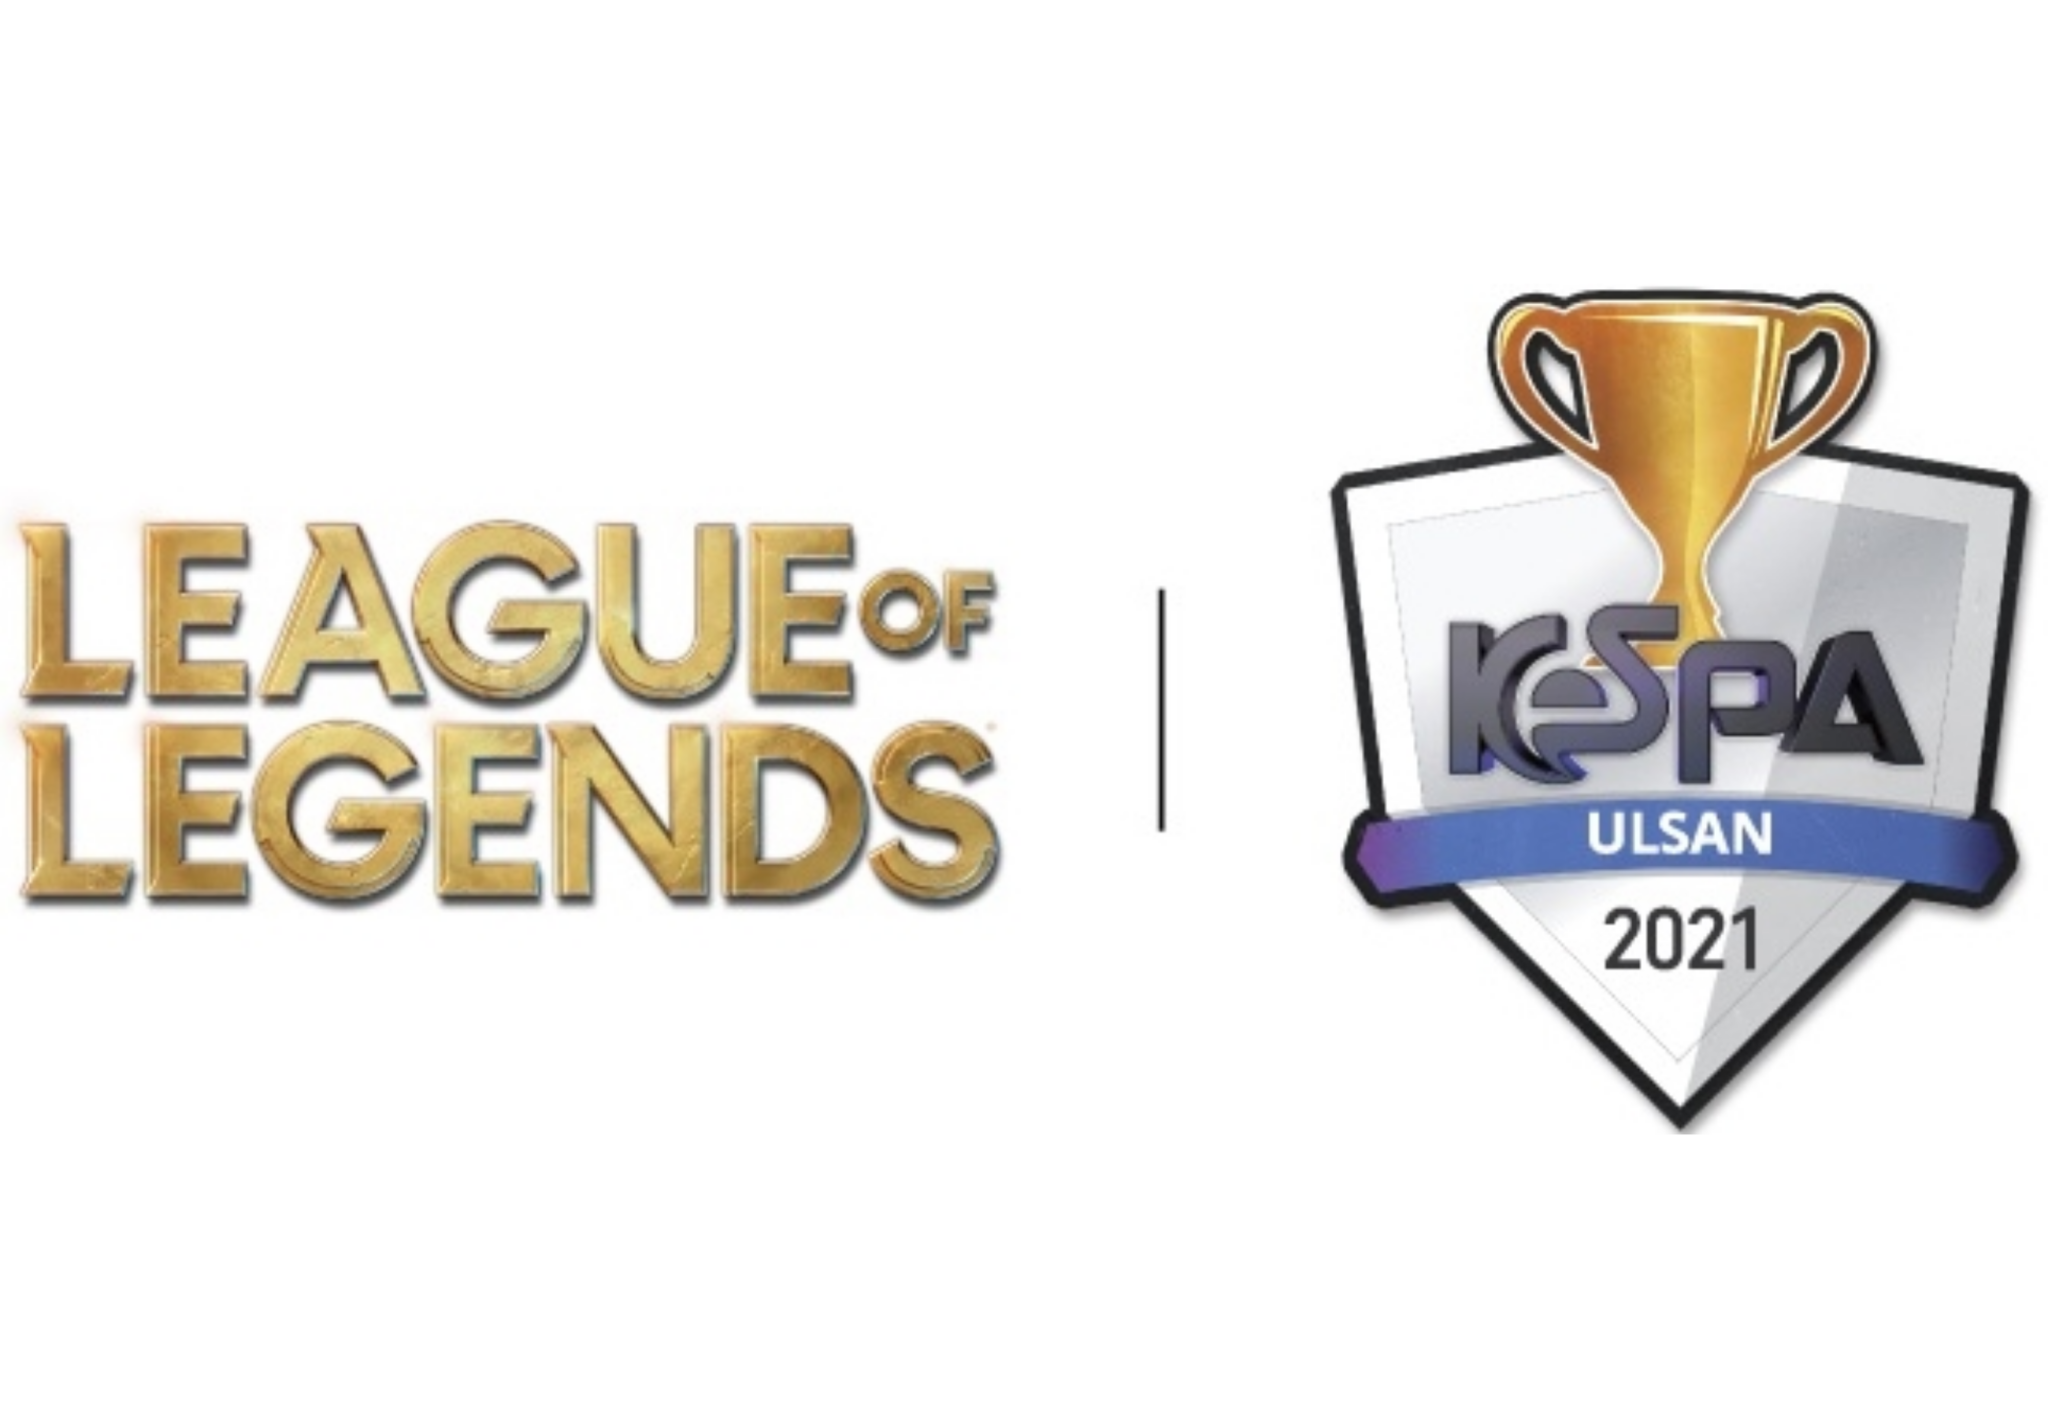 KeSPA Cup 2021 returns to offline setting, will feature more than just LCK teams - Dot Esports